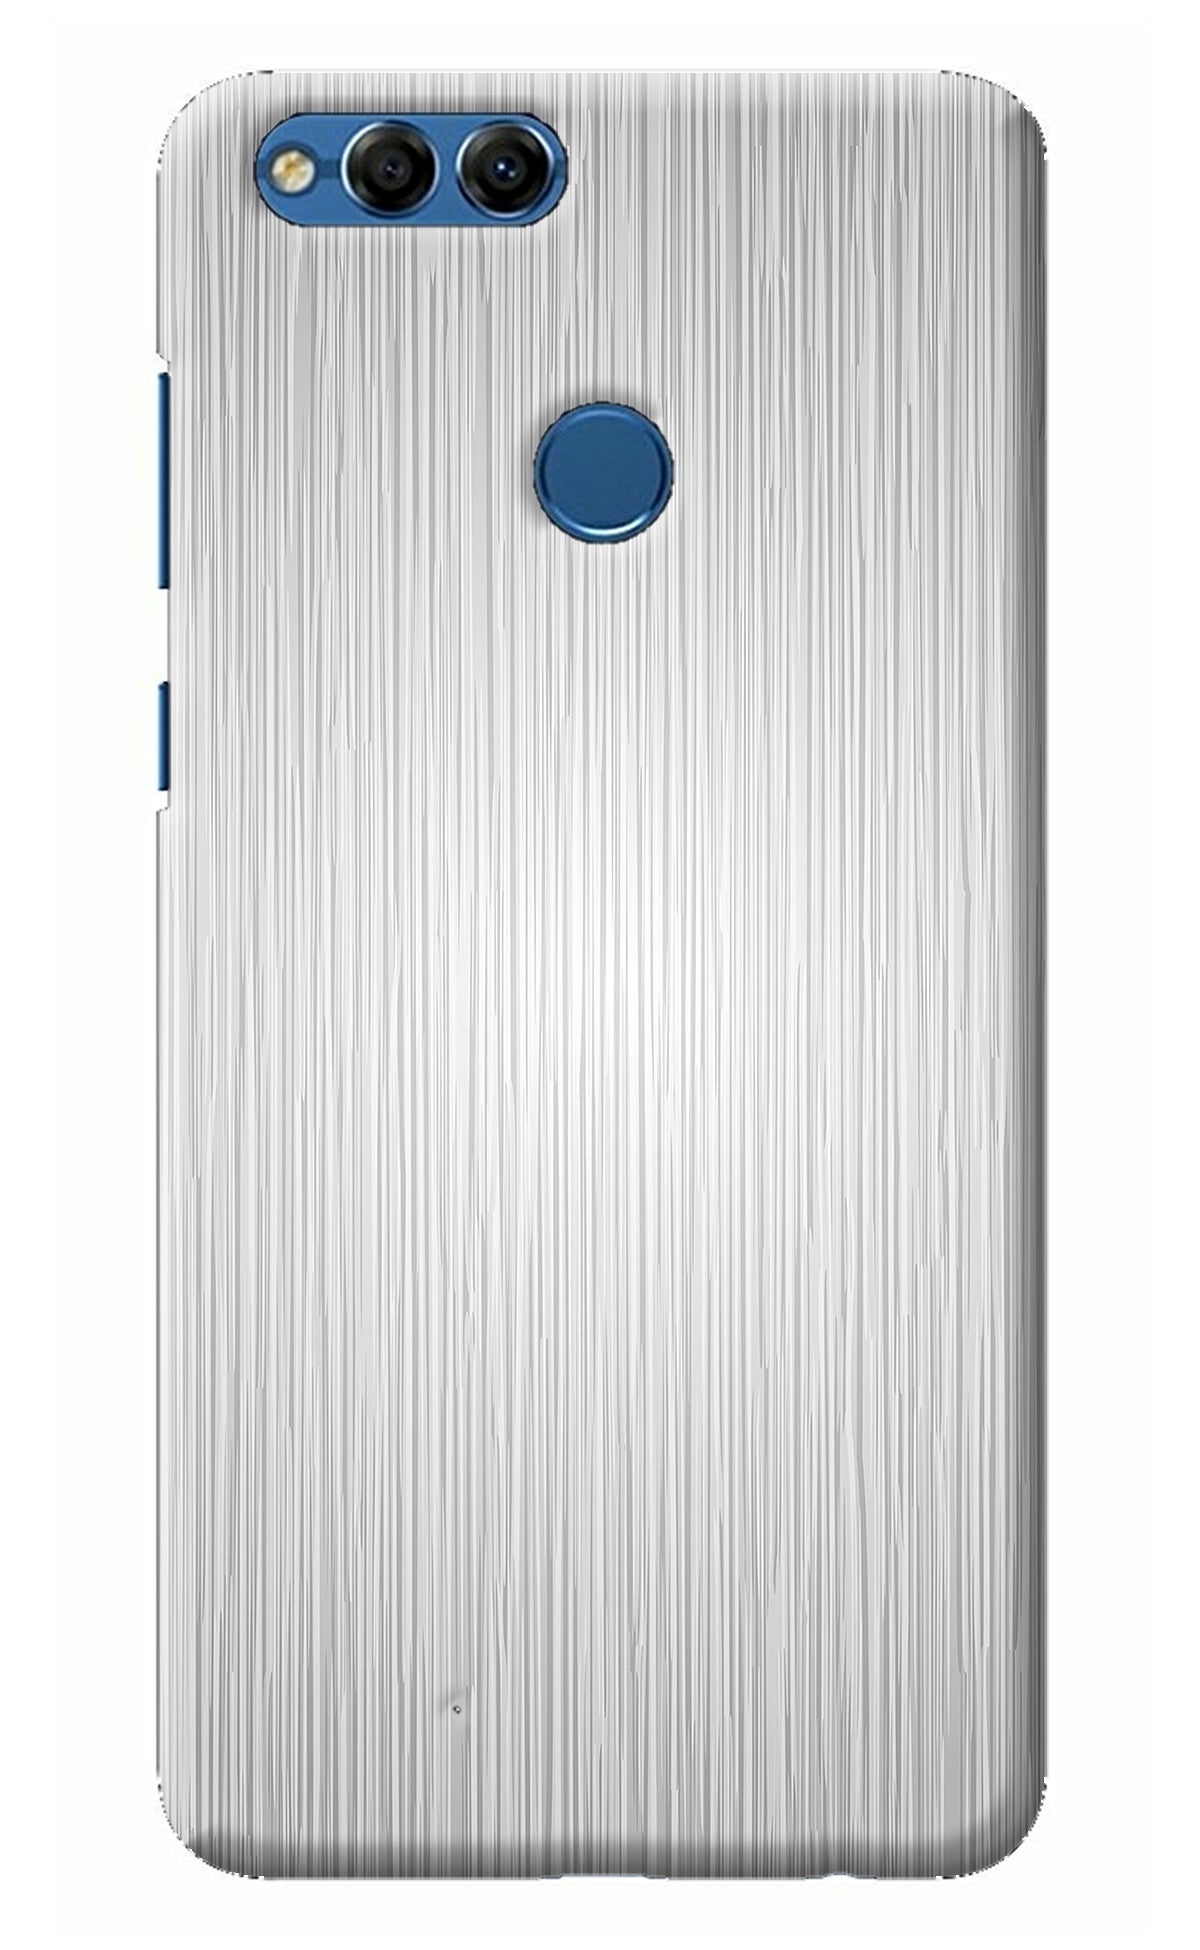 Wooden Grey Texture Honor 7X Back Cover